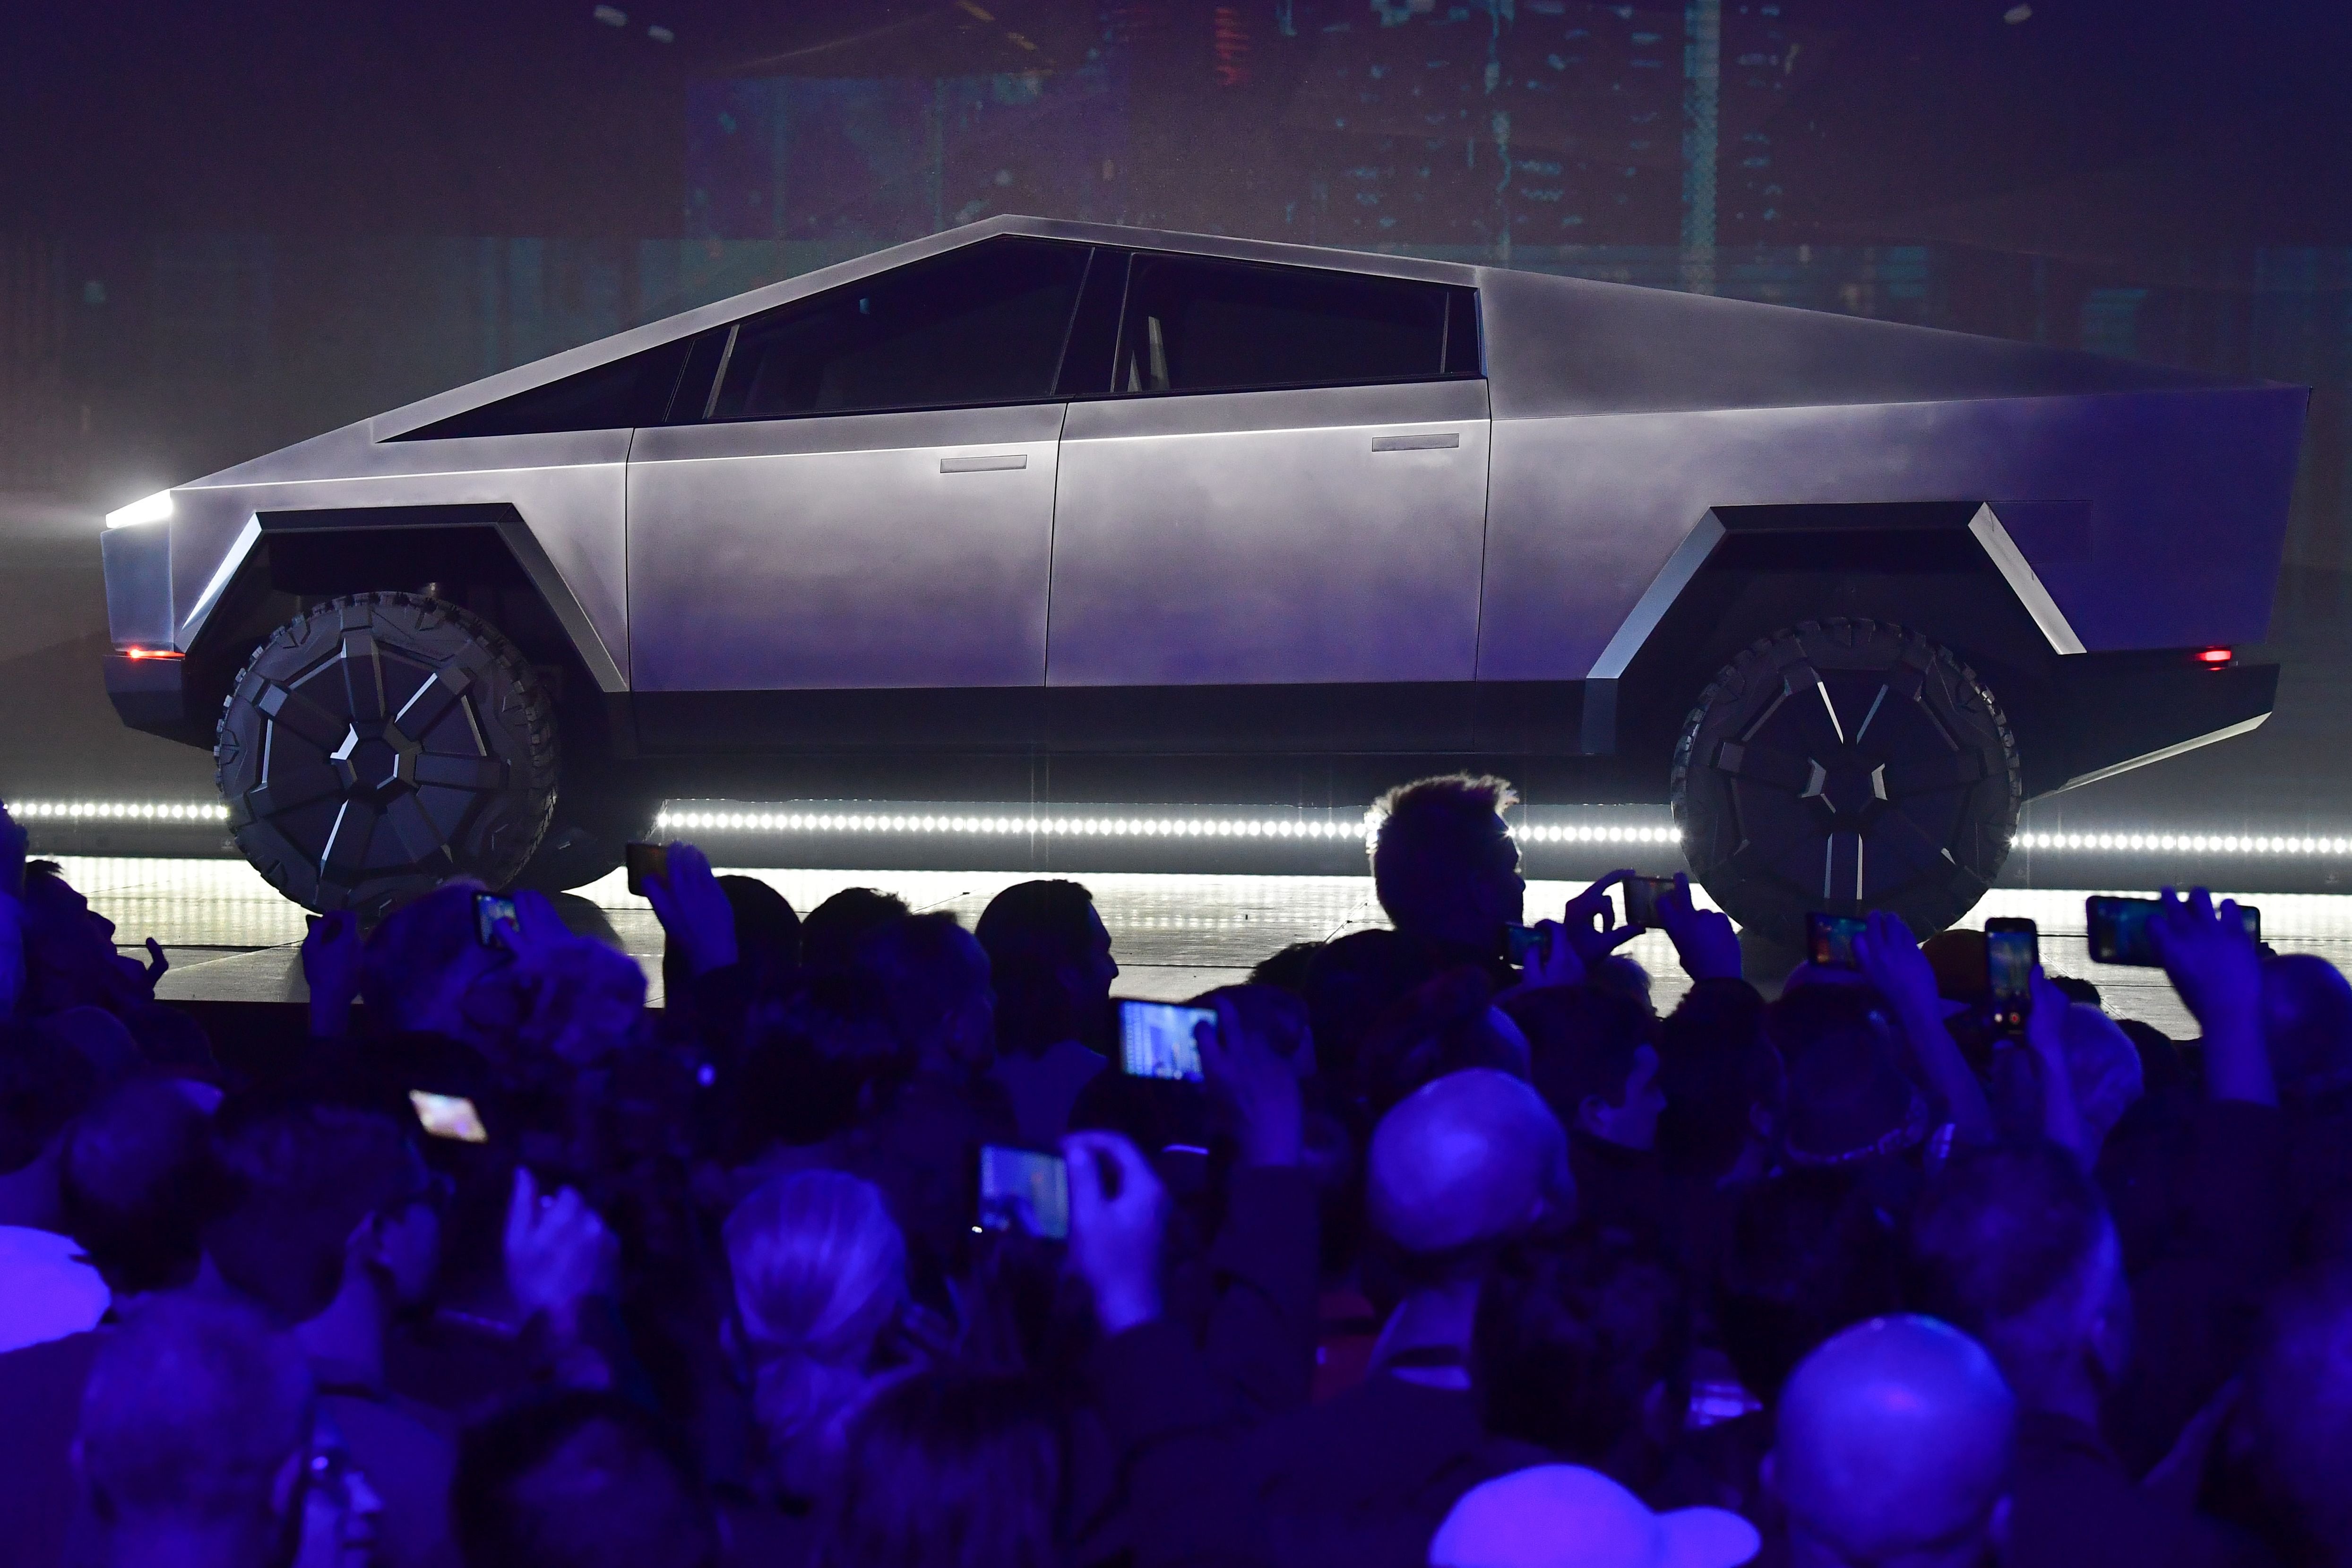 The very angular and matte-gray Cybertruck is on display on a stage above a crowd of people's heads at the Tesla Design Center in California. Almost everyone has their phone raised to take a picture. 